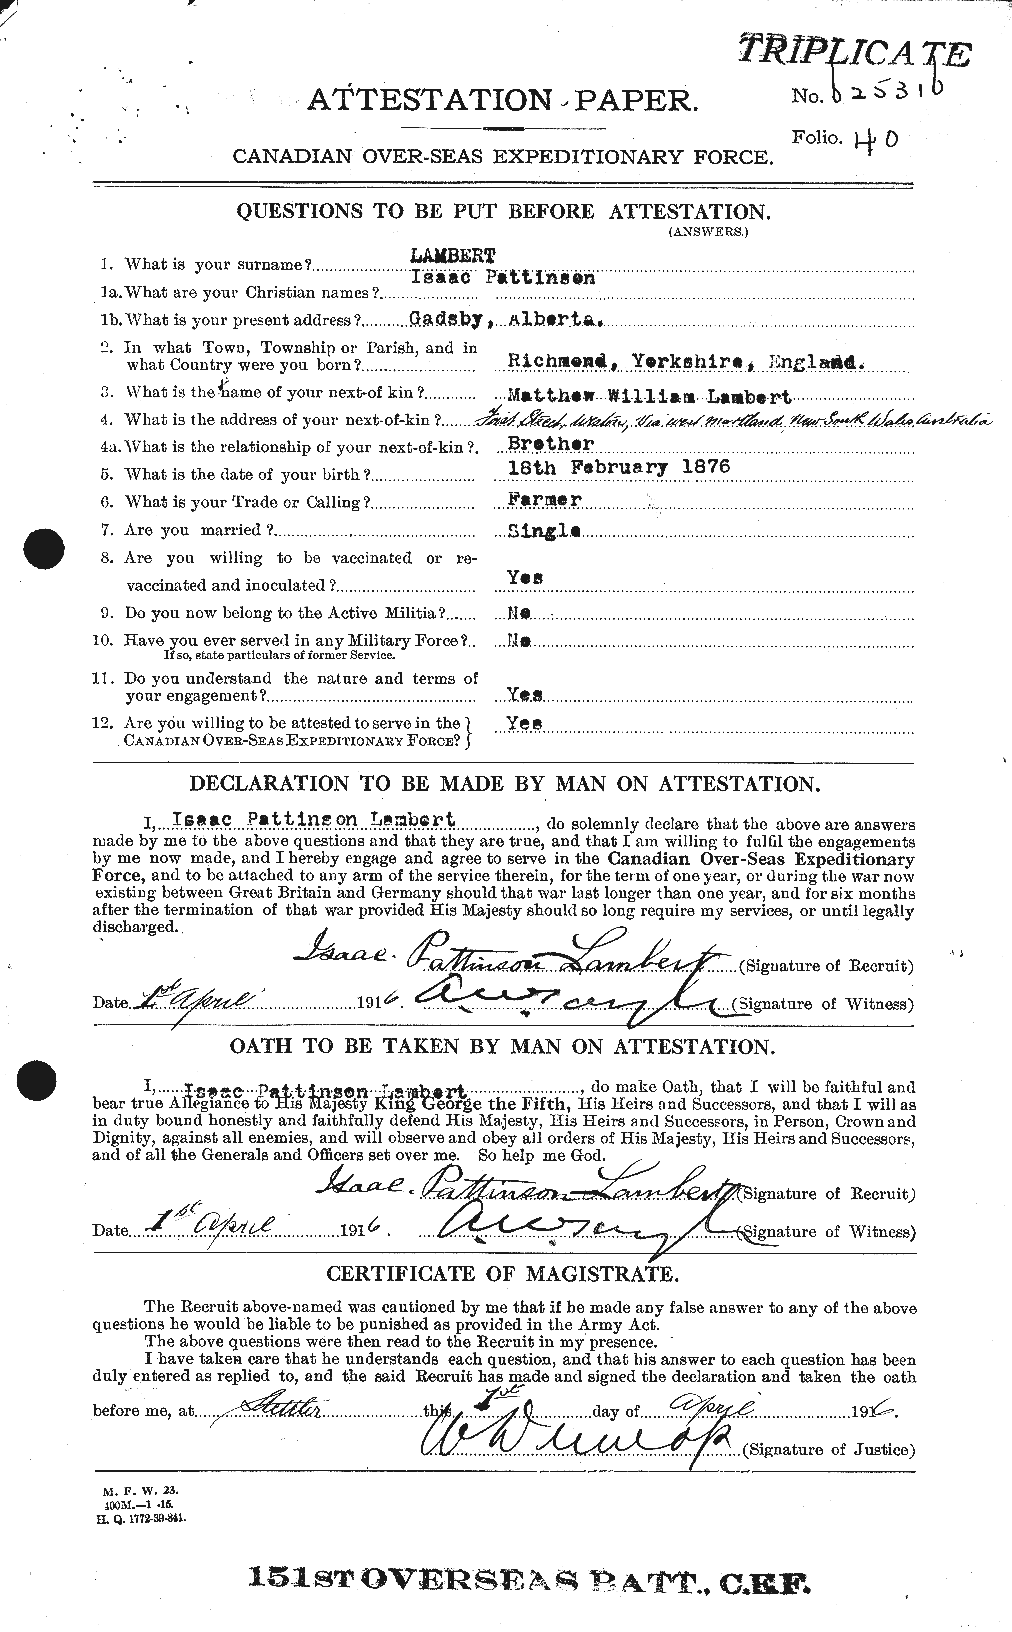 Personnel Records of the First World War - CEF 445763a